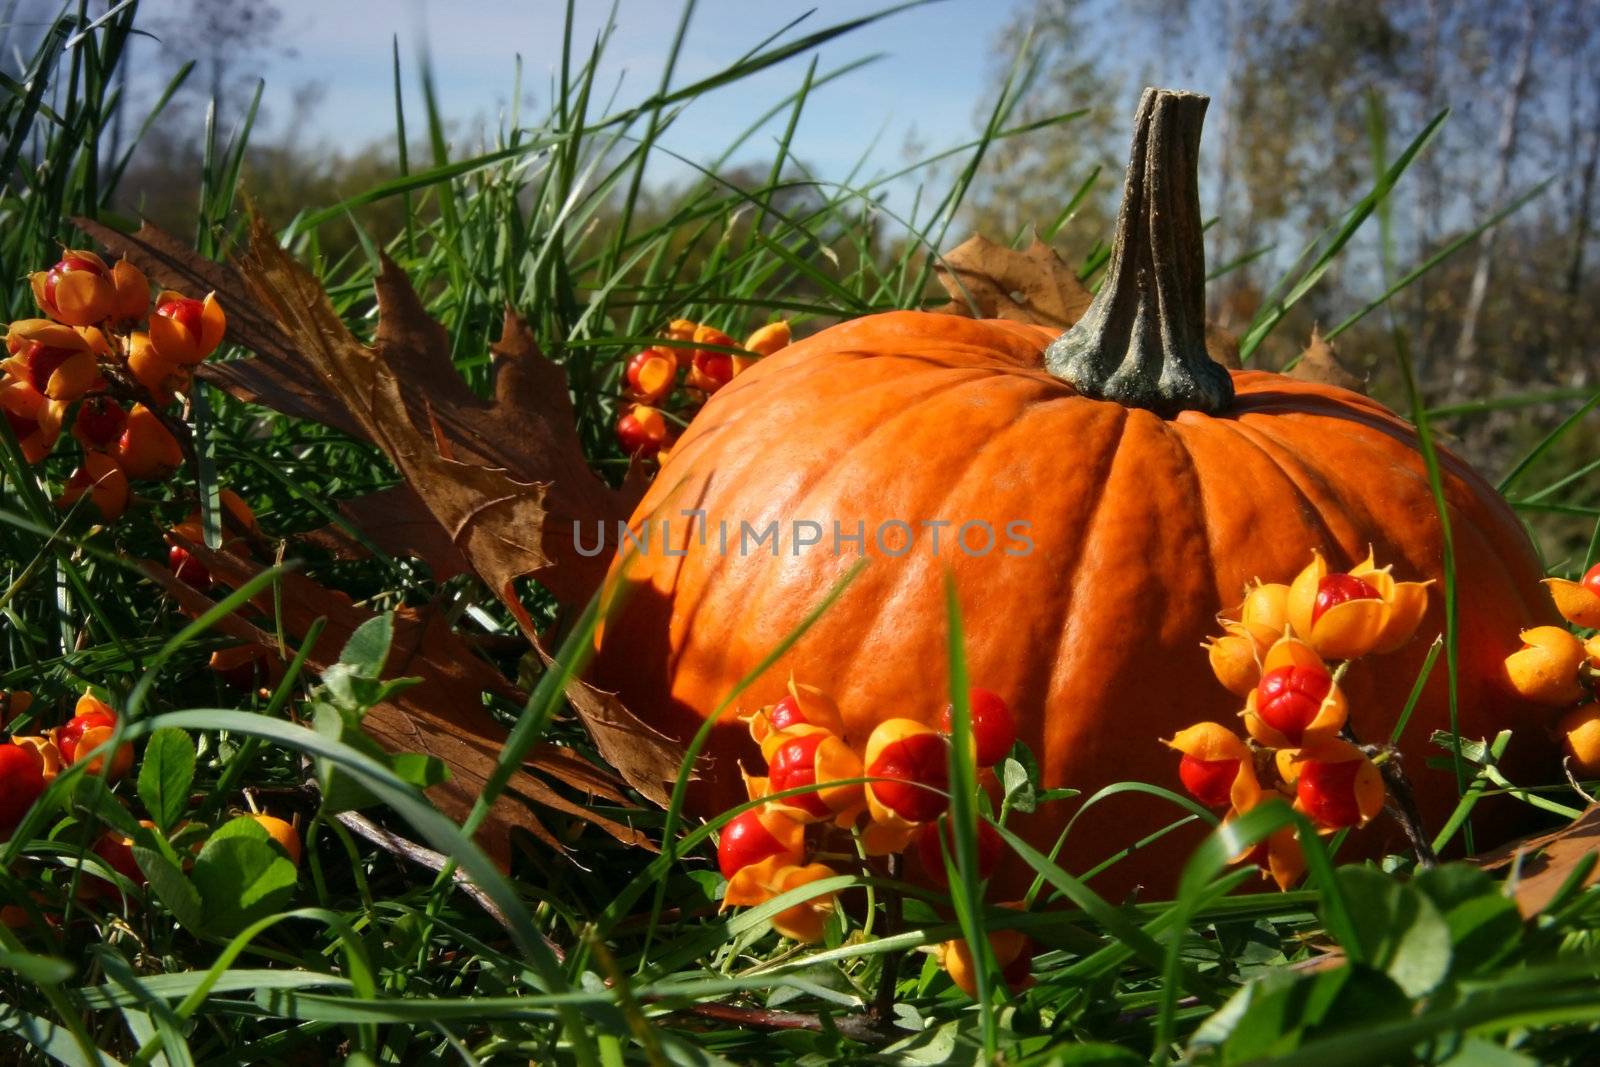 Pumpkins in the grass by Sandralise